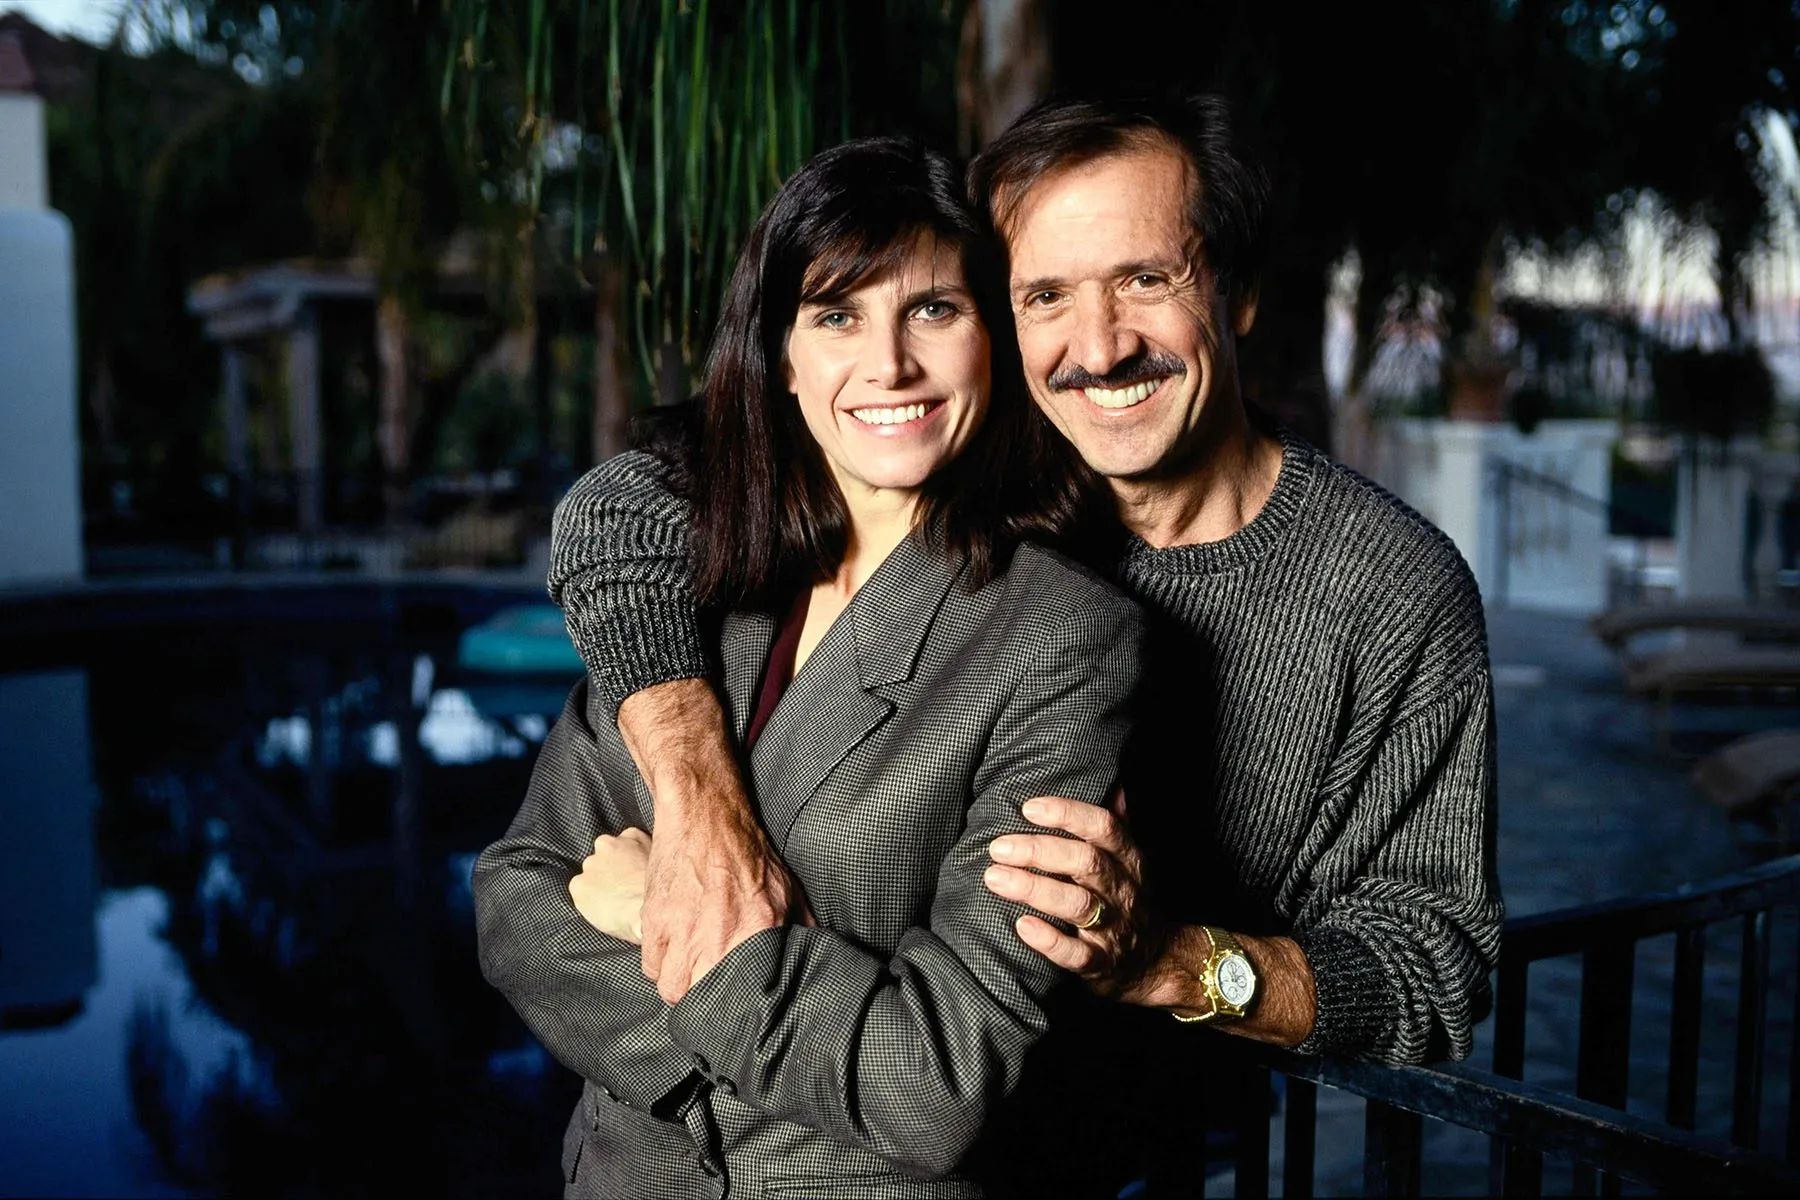 Sonny and Mary Bono hold each other as they pose for a portrait.